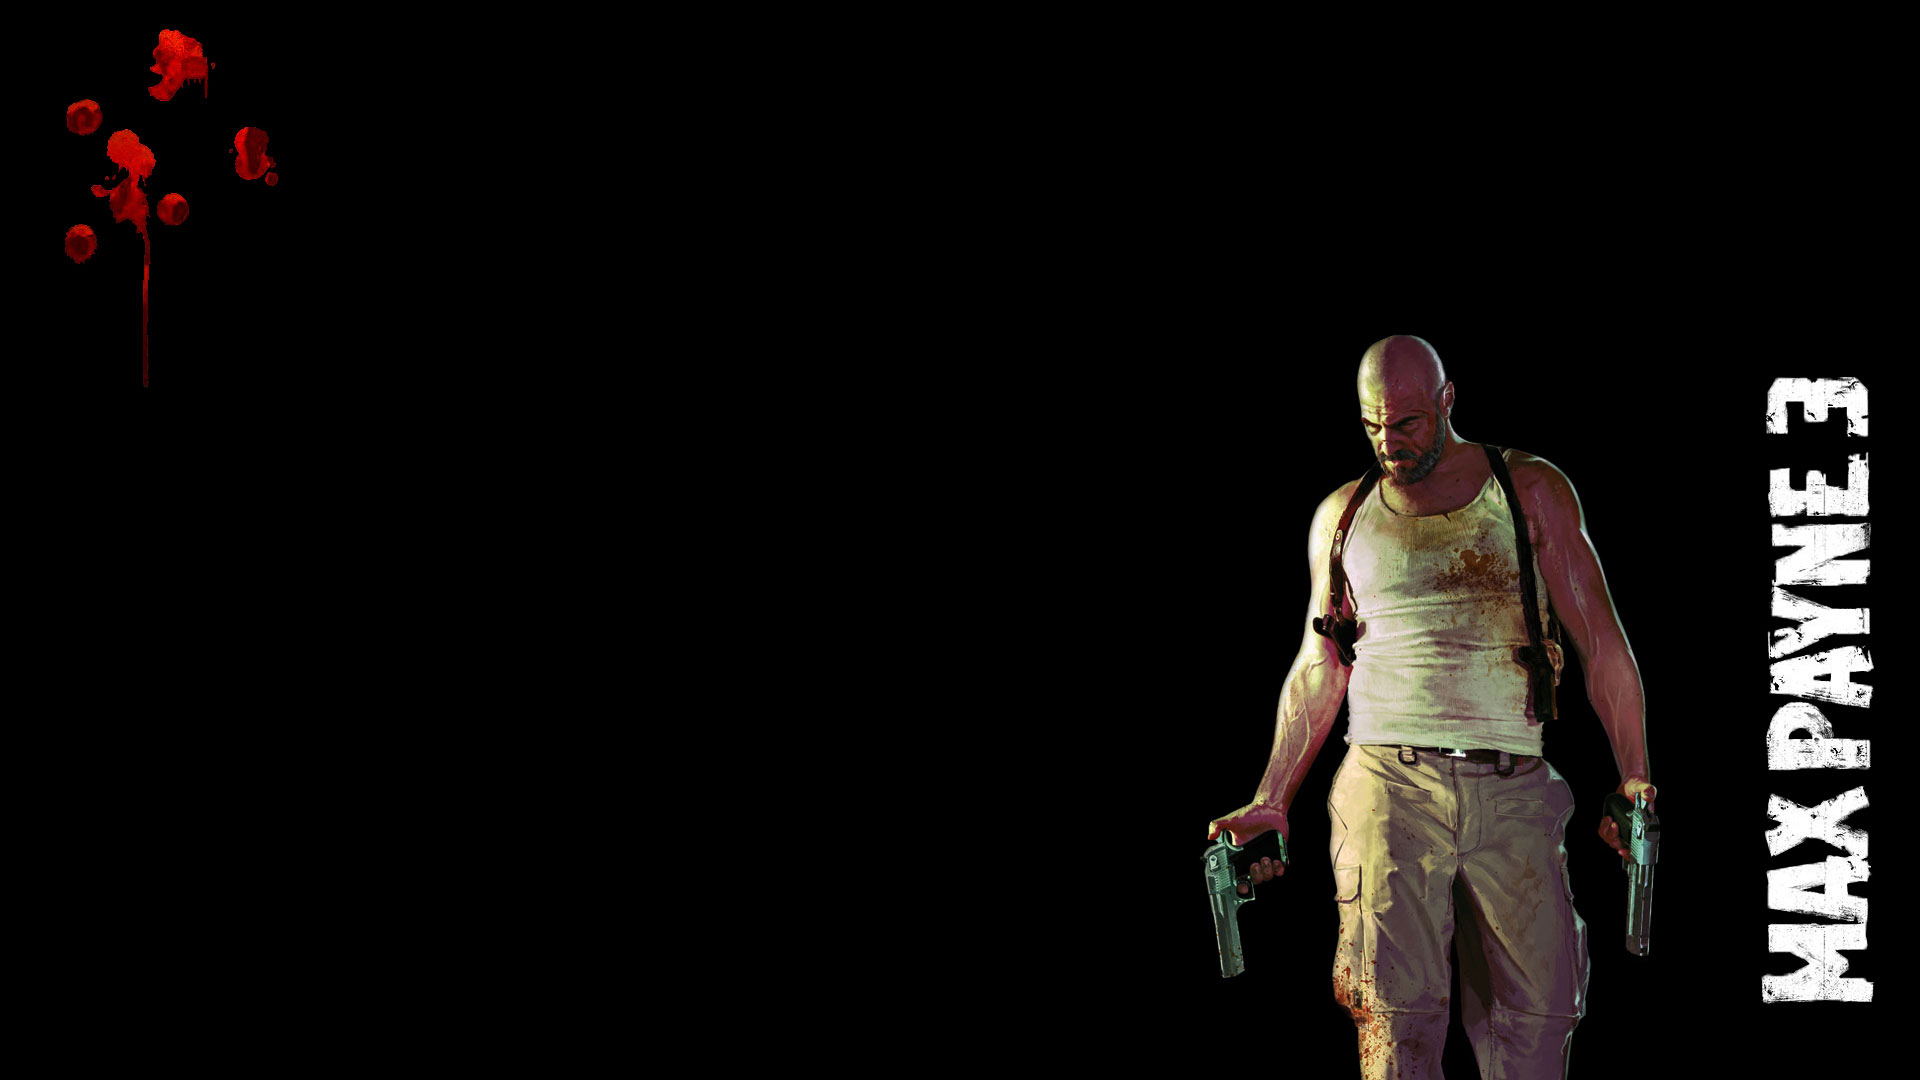 Max Payne 3 Wallpapers in HD Page 2